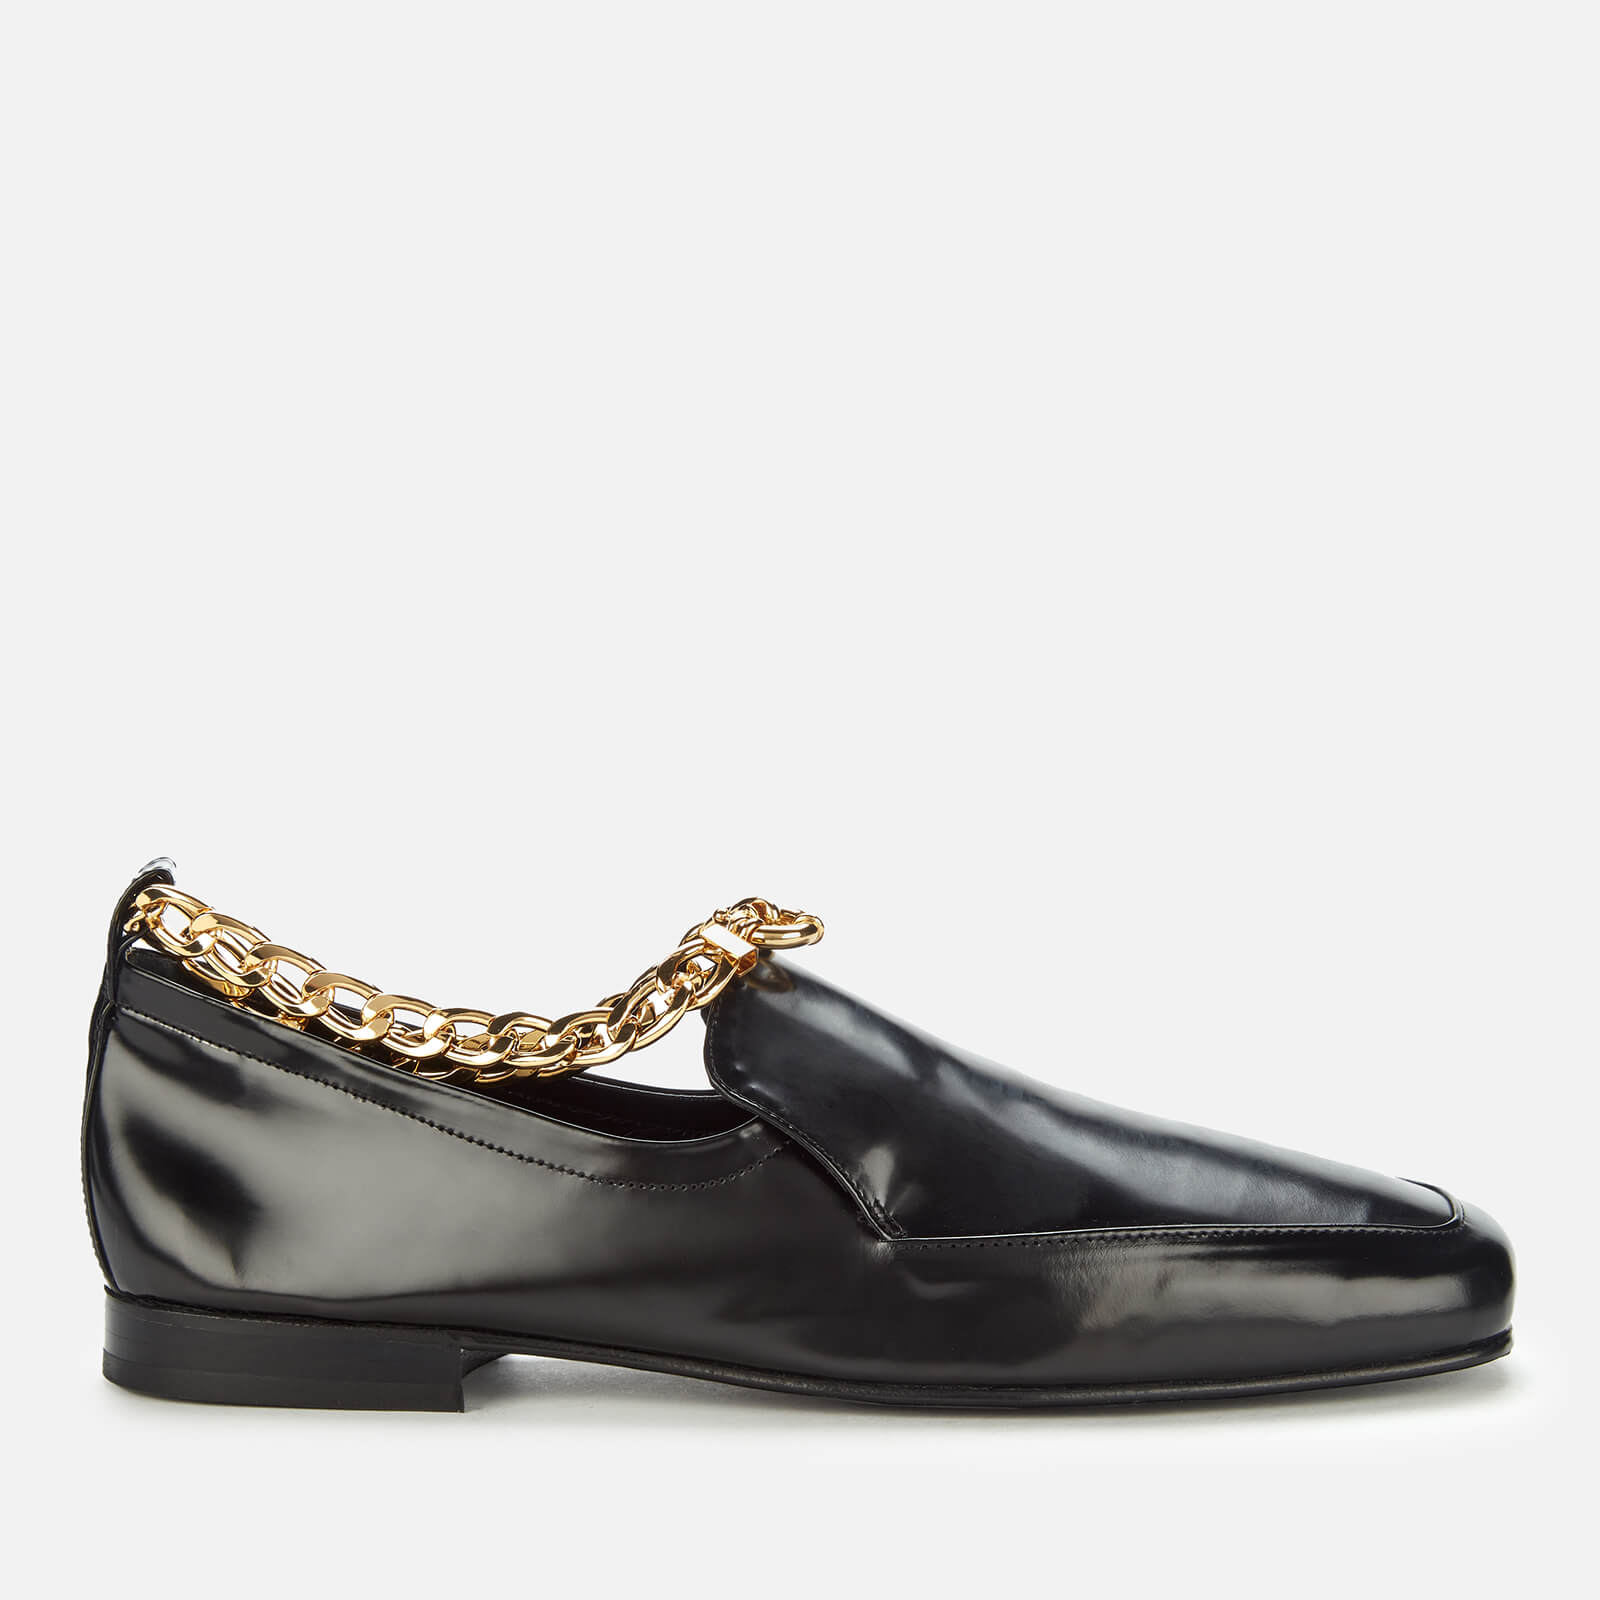 BY FAR Women's Nick Semi Patent Leather Loafers - Black - UK 4